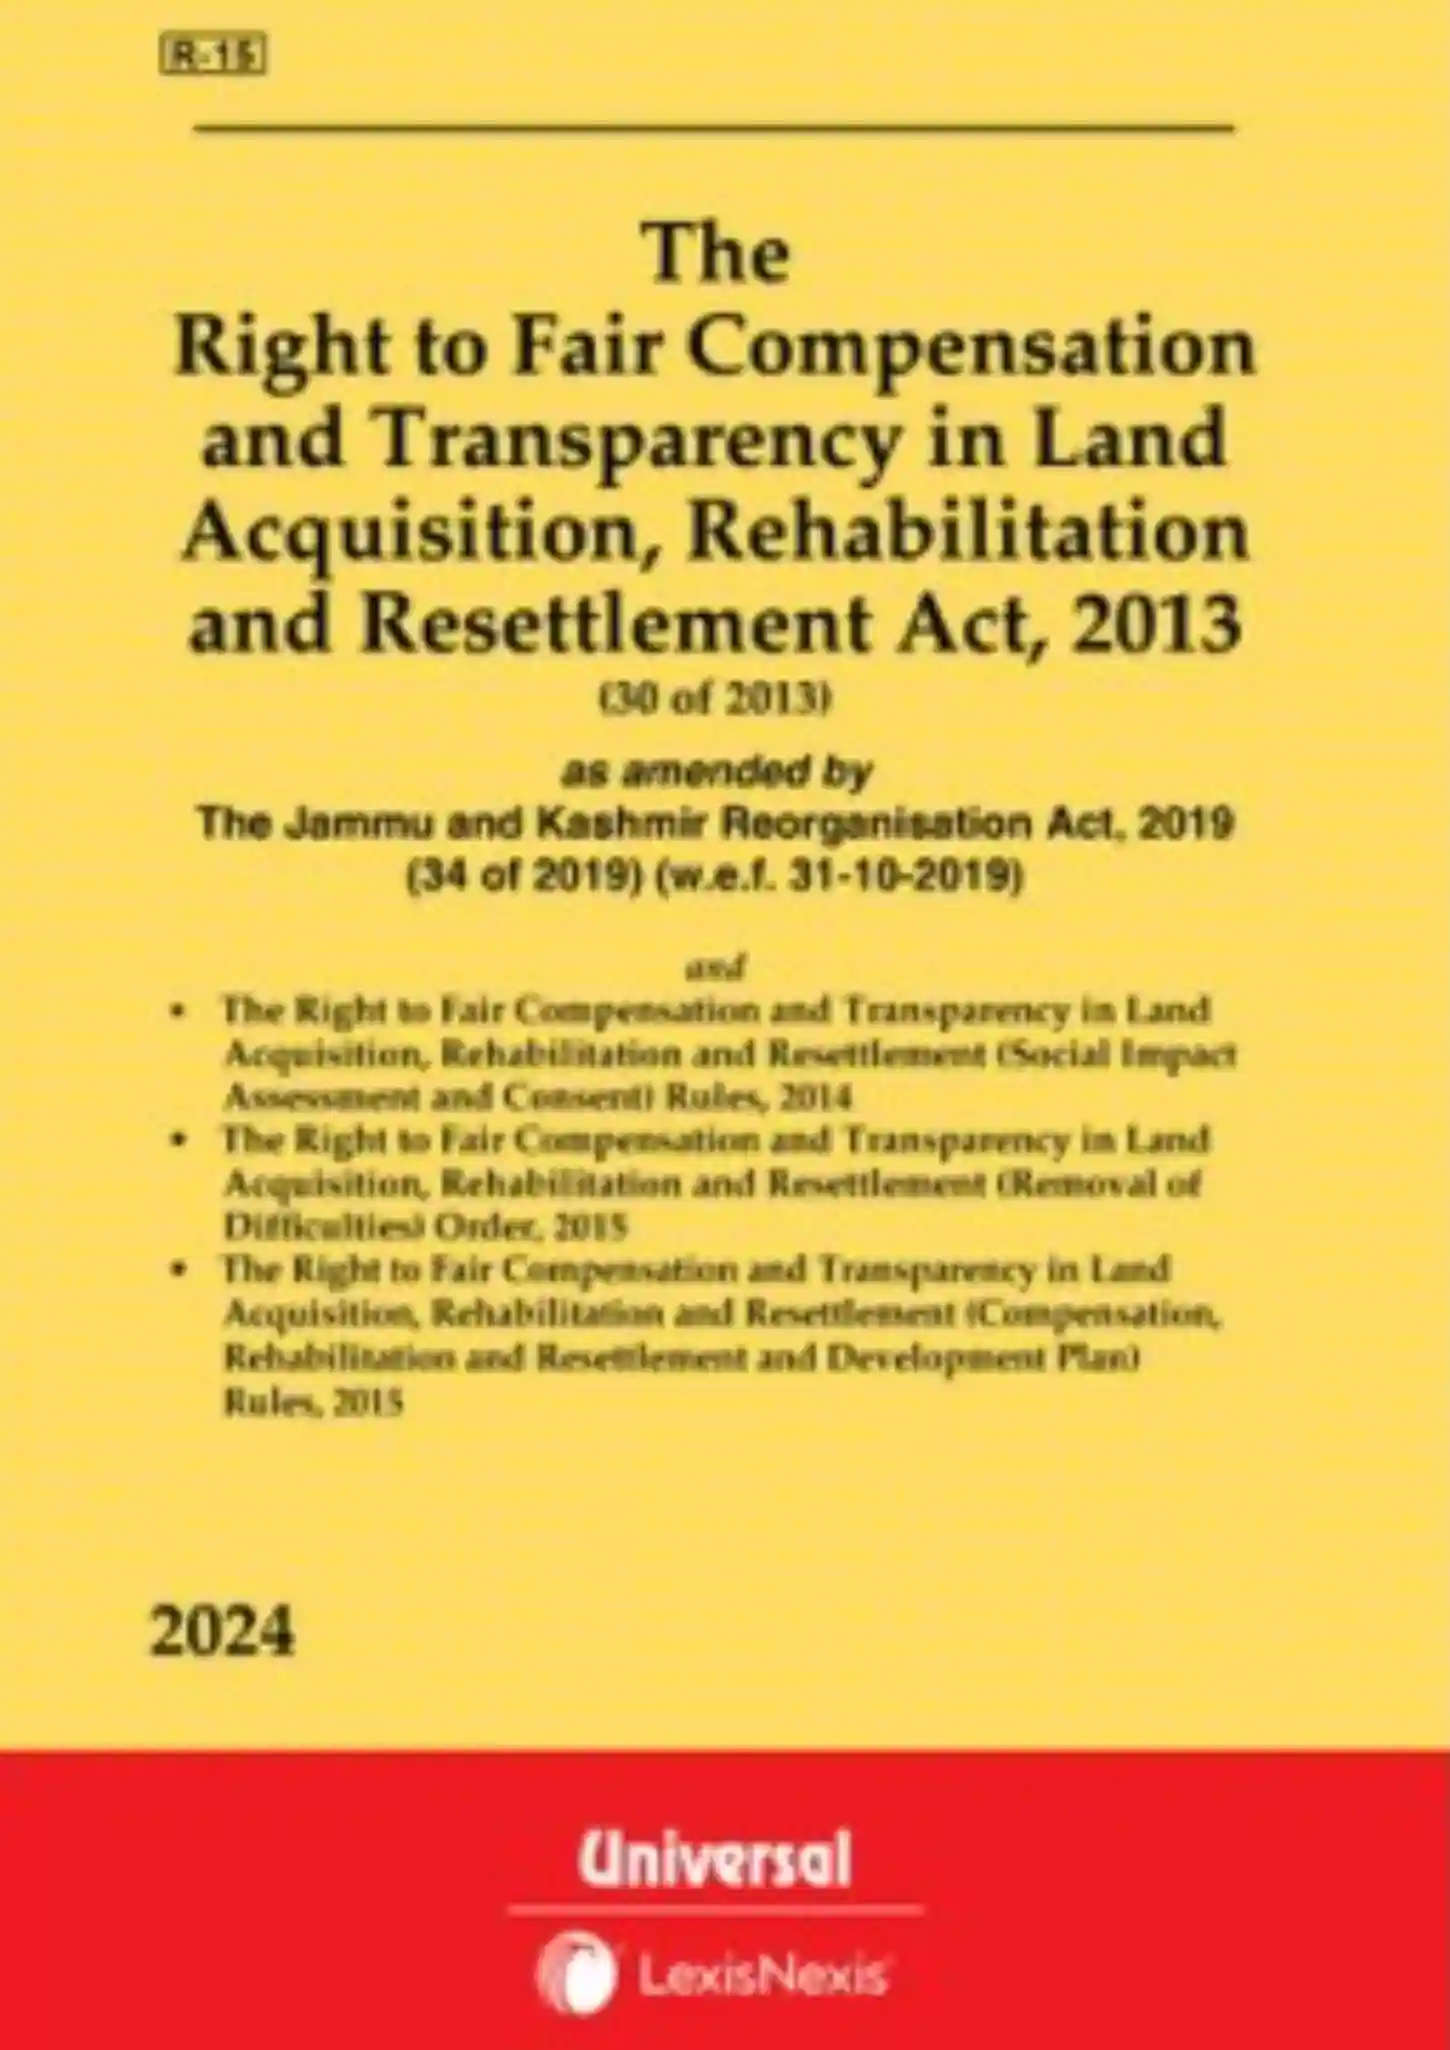 The Right to Fair Compensation and Transparency in Land Acquisition, Rehabilitation and Resettlement Act, 2013